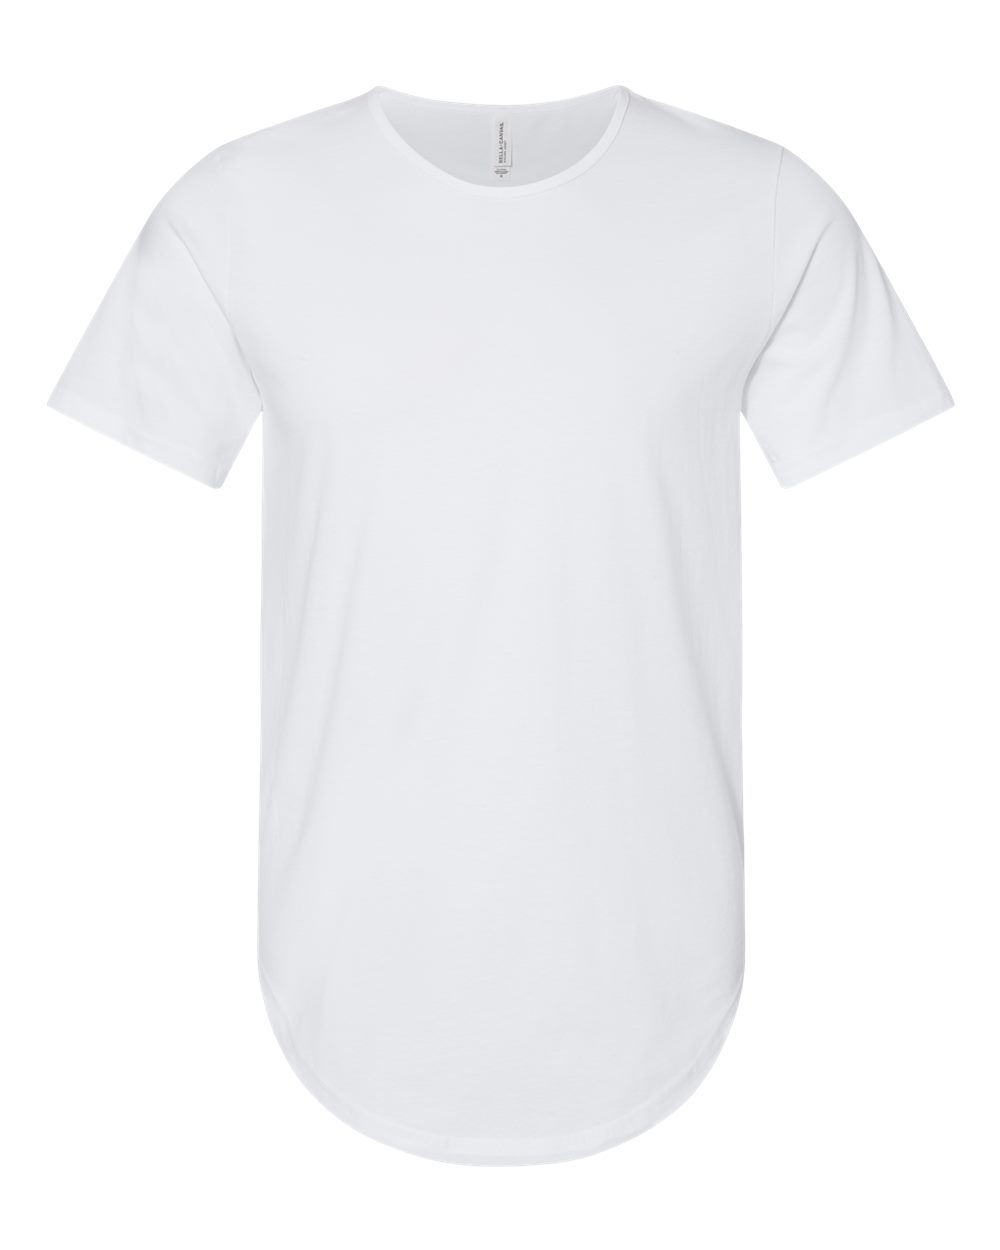 BELLA + CANVAS Jersey Curved Hem Tee - image 1 of 3